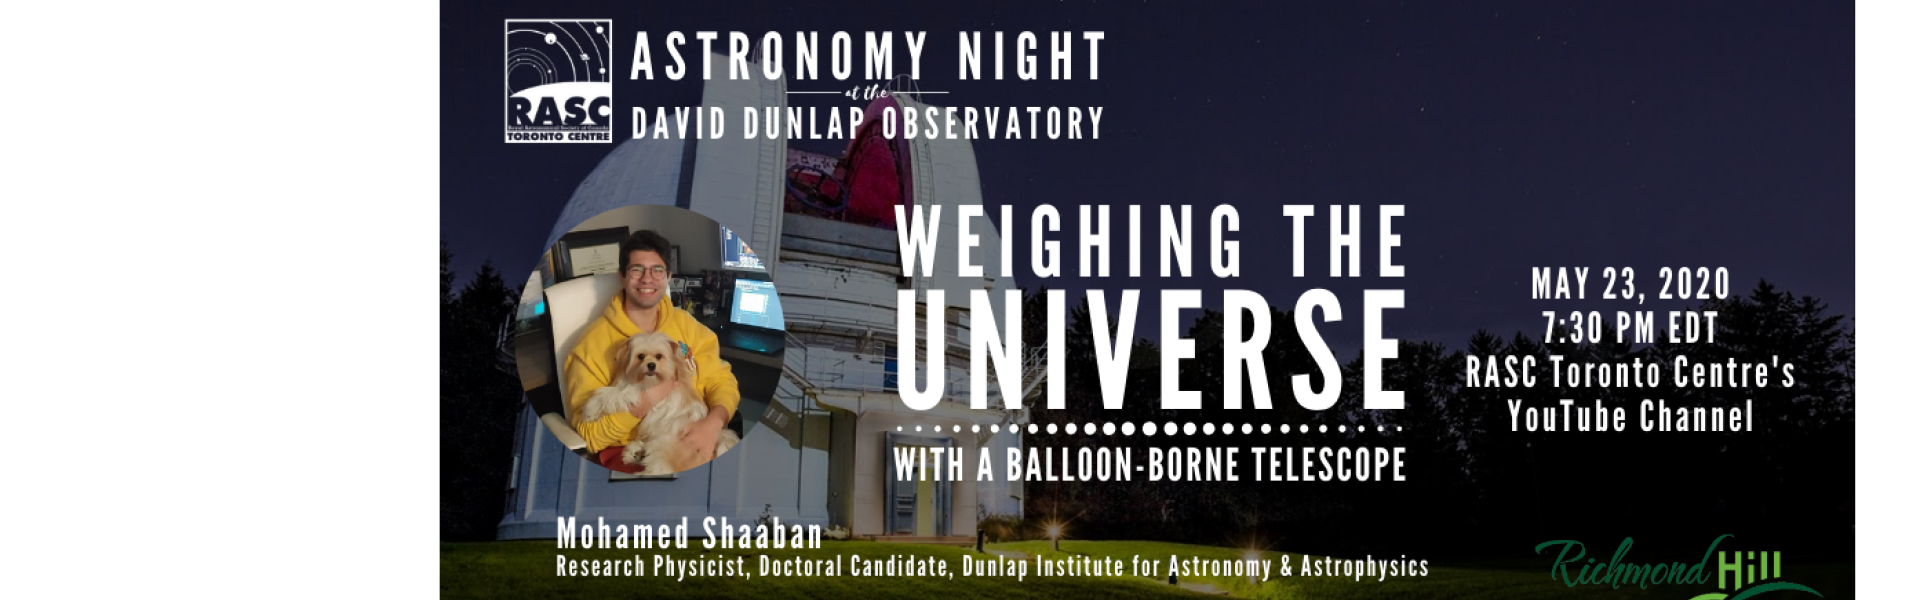 Weighing the Universe With a Balloon-Borne Telescope